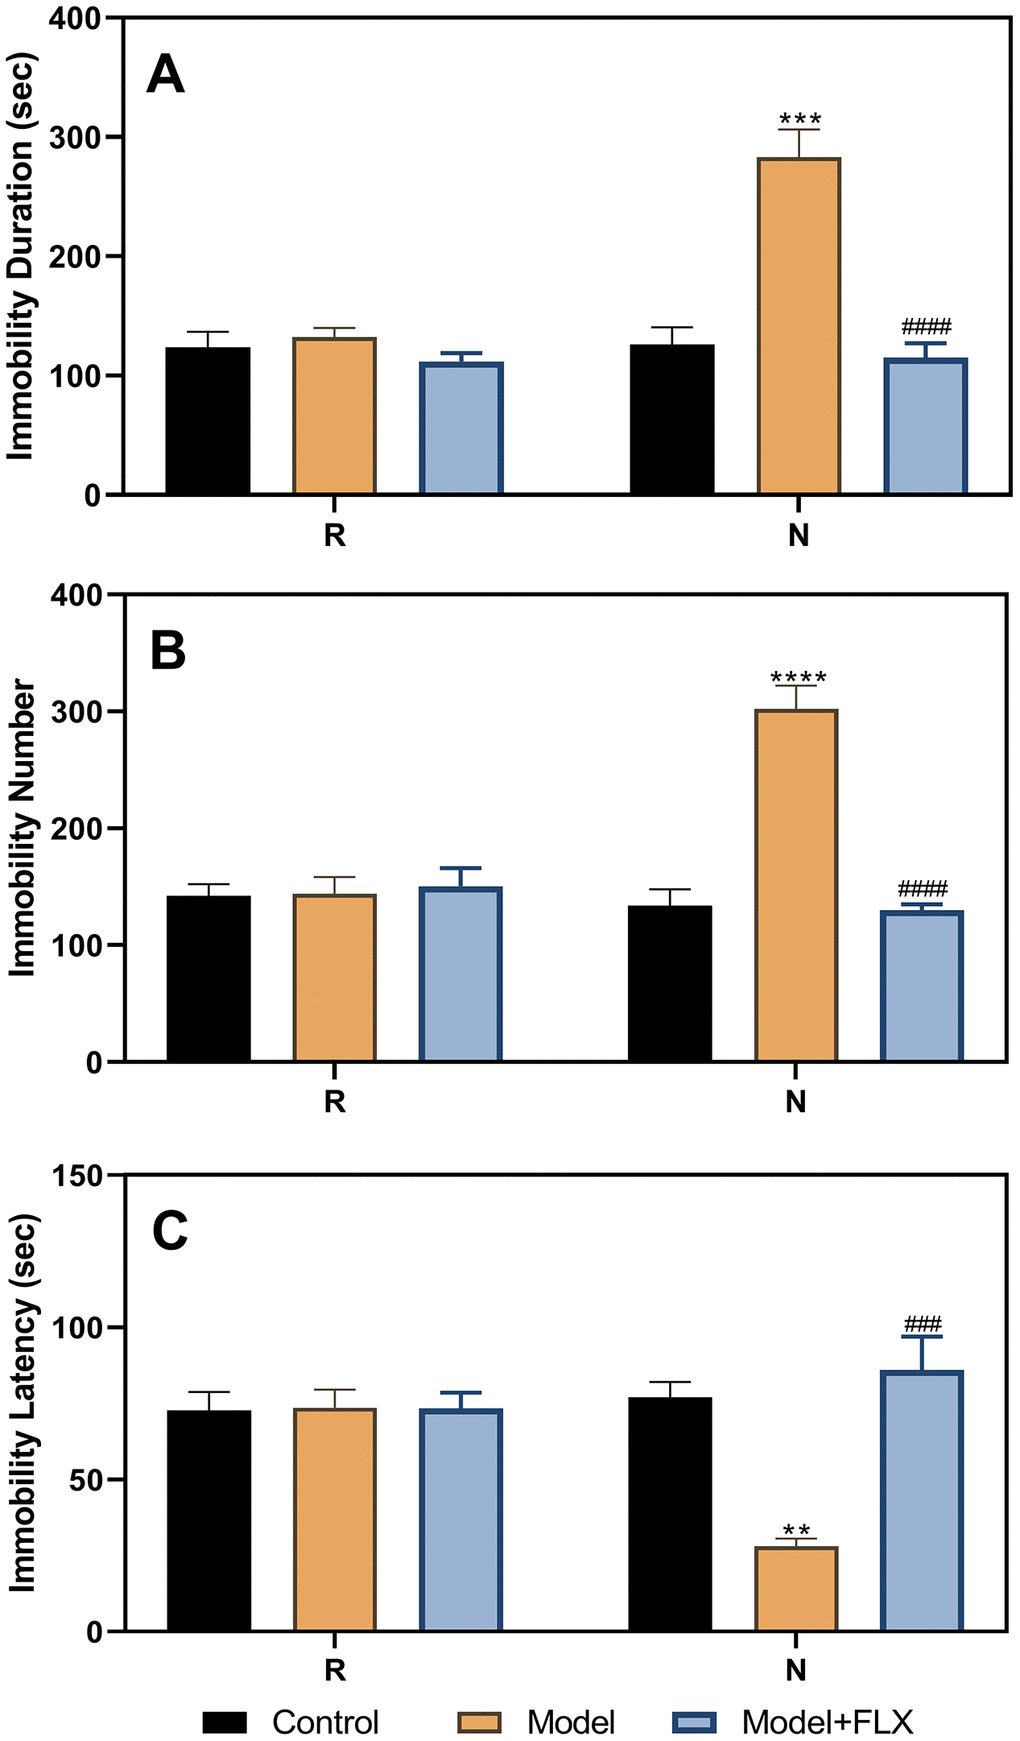 Results of the forced swimming test after fluoxetine treatment of the hormone-primed rats. (A) Results of immobility duration. (B) Results of immobility number. (C) Results of immobility latency. N, the test in the non-receptive phase; R, the test in the receptive phase. **ppppp